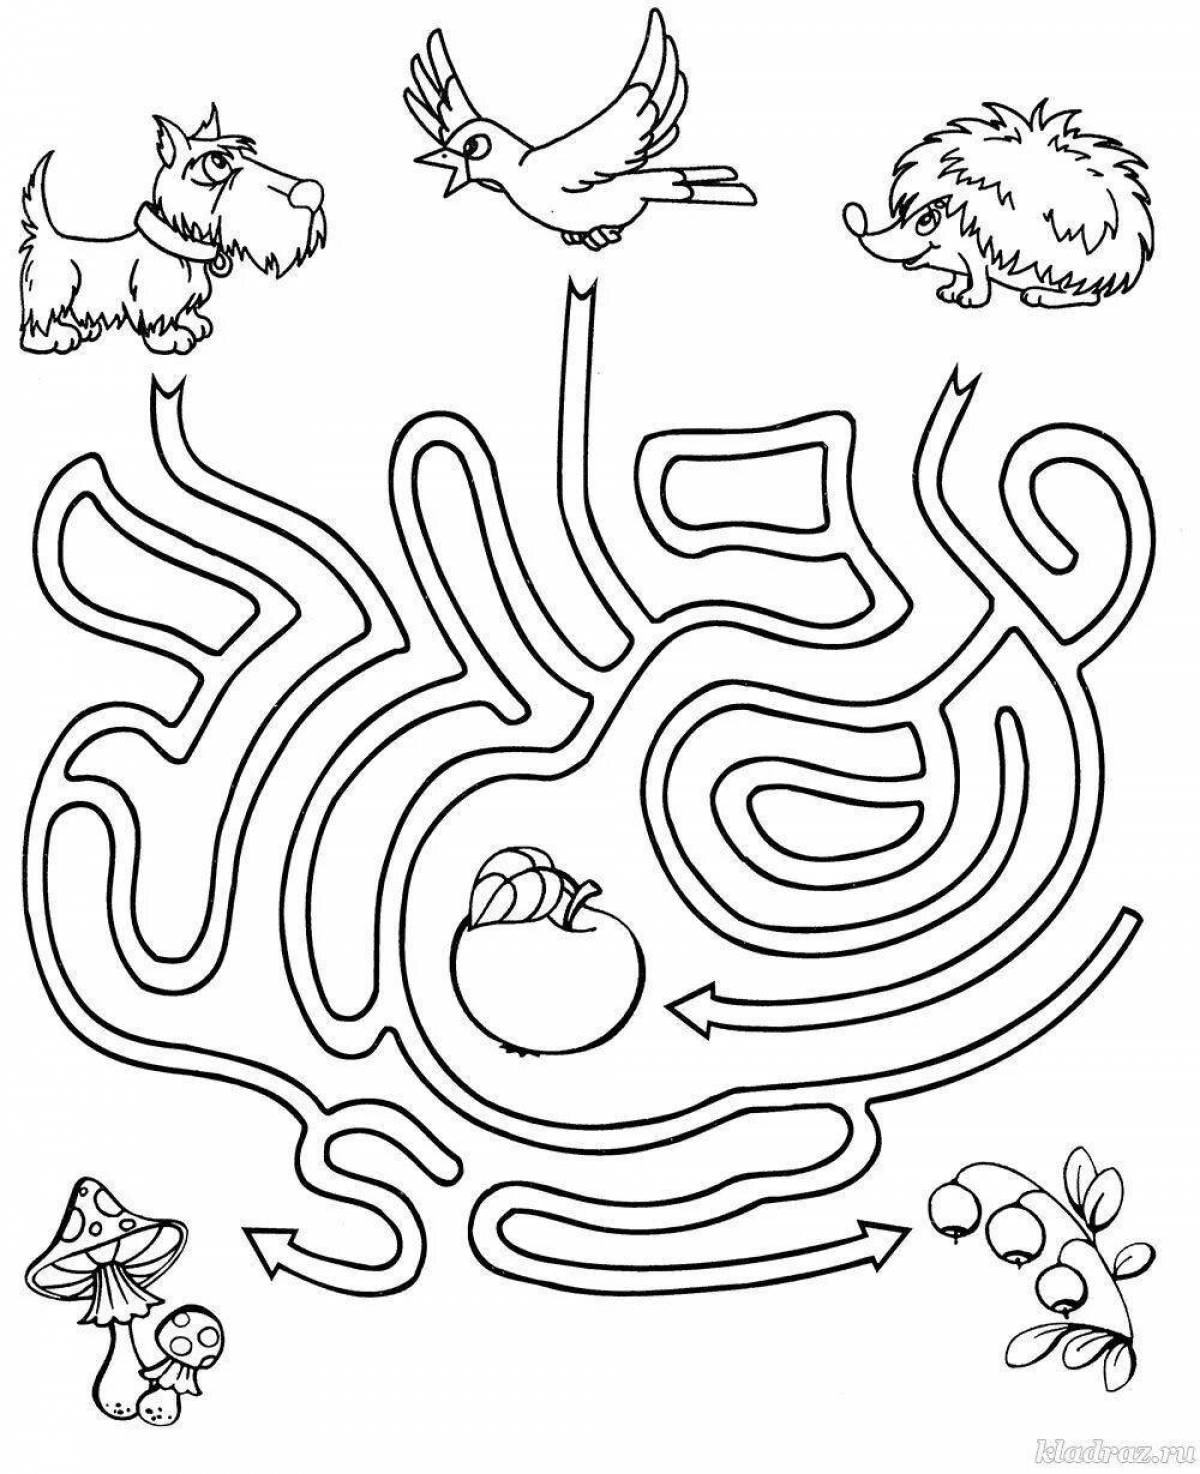 Mazes for children 4 5 years old #14